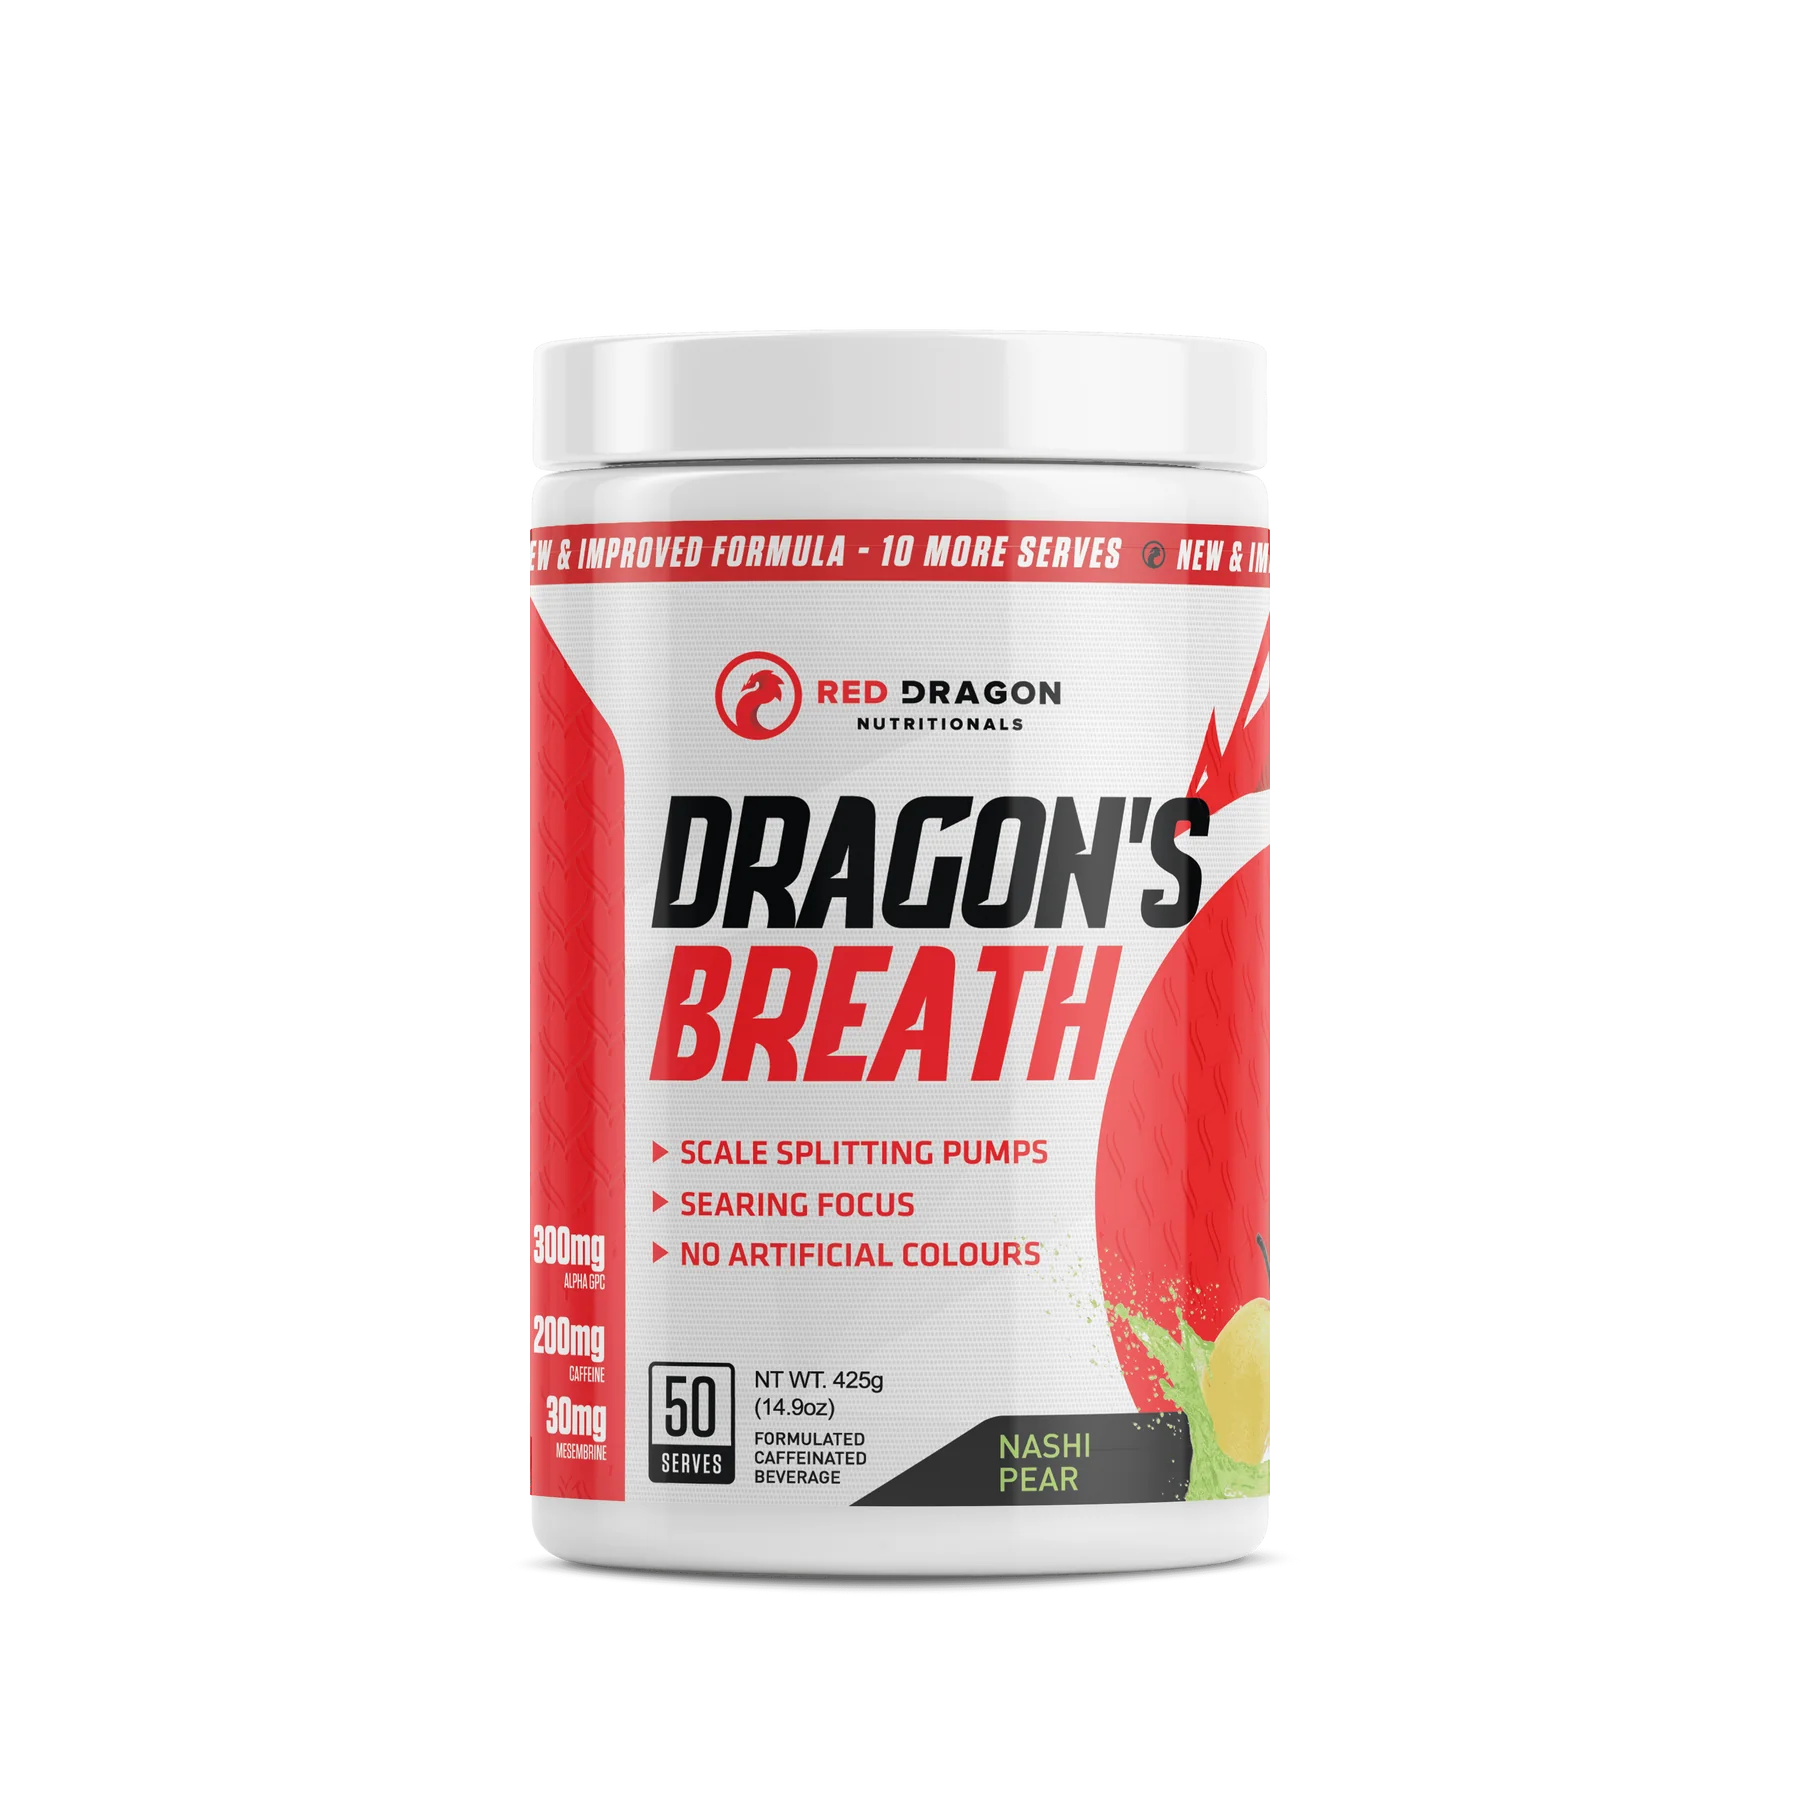 Dragon's Breath is a top-tier pre-workout that contains clinically proven doses of compounds that deliver pumps, energy, and focus